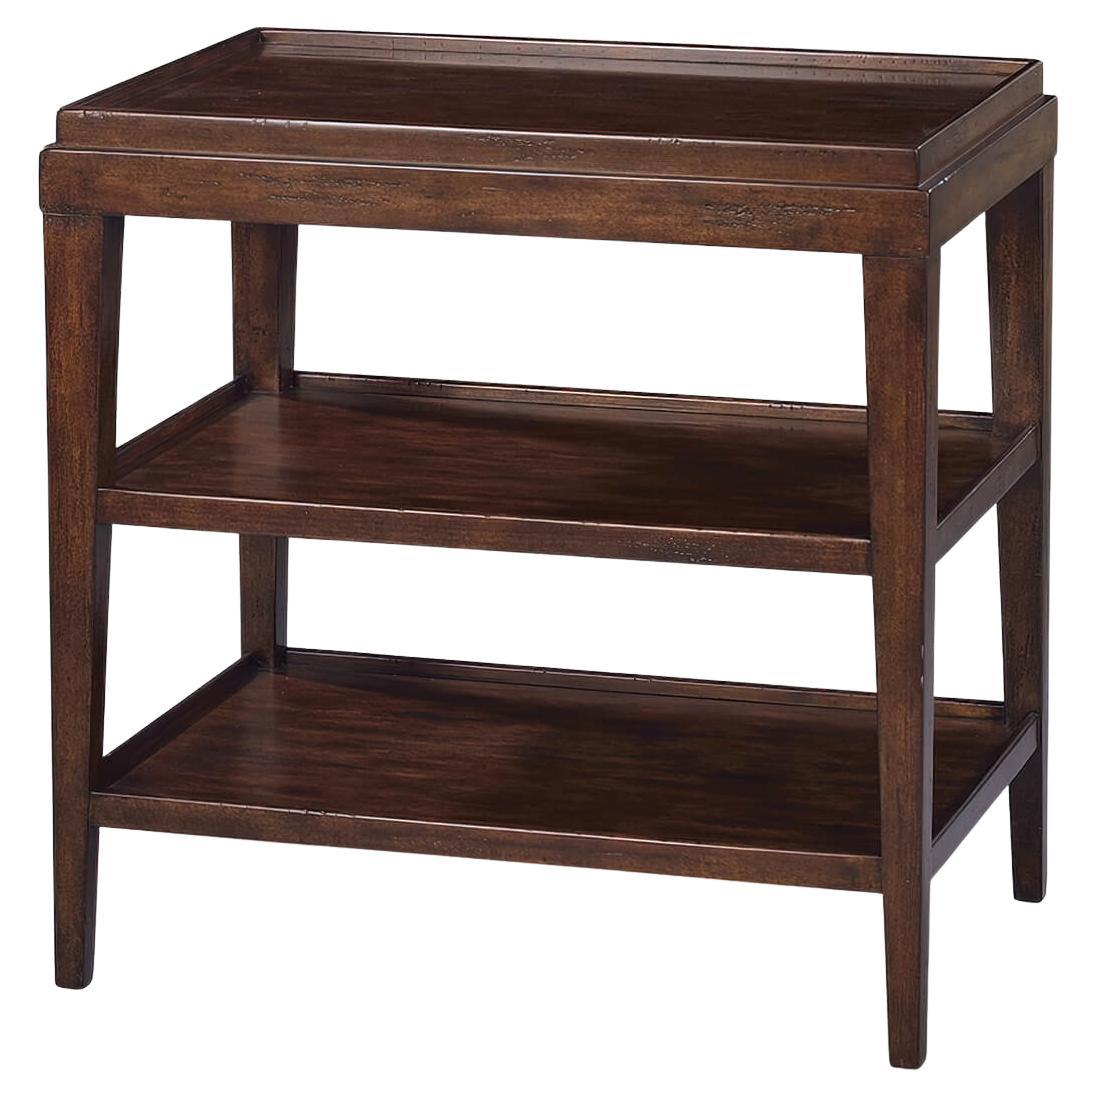 Classic Three-Tier Side Table, Rustic